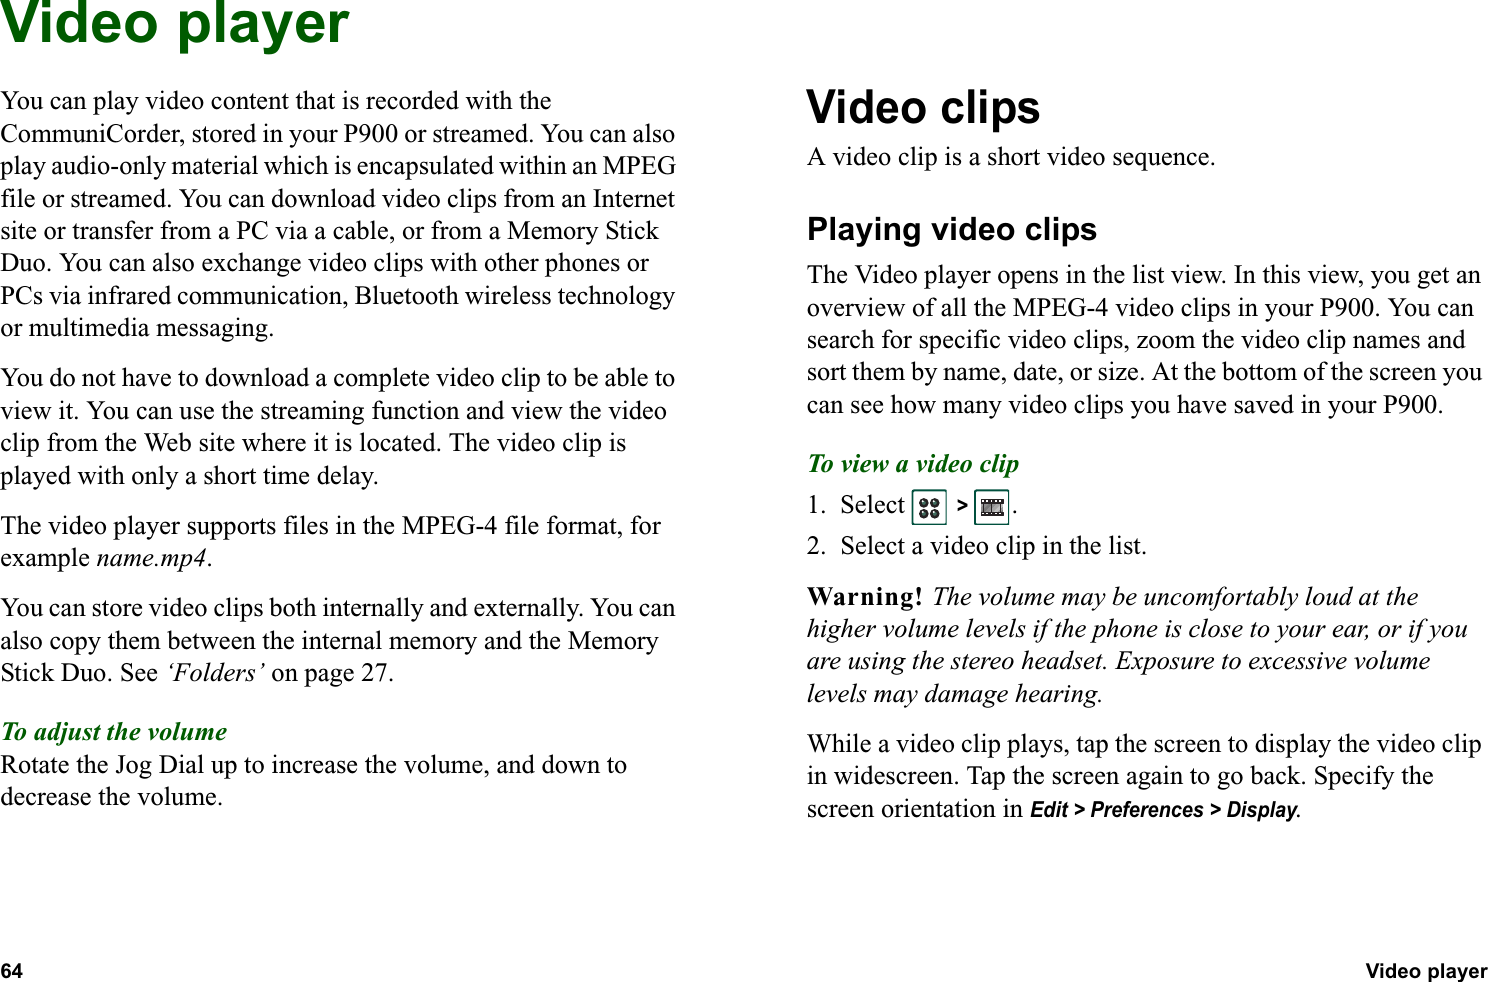 64 Video player  Video playerYou can play video content that is recorded with the CommuniCorder, stored in your P900 or streamed. You can also play audio-only material which is encapsulated within an MPEG file or streamed. You can download video clips from an Internet site or transfer from a PC via a cable, or from a Memory Stick Duo. You can also exchange video clips with other phones or PCs via infrared communication, Bluetooth wireless technology or multimedia messaging.You do not have to download a complete video clip to be able to view it. You can use the streaming function and view the video clip from the Web site where it is located. The video clip is played with only a short time delay.The video player supports files in the MPEG-4 file format, for example name.mp4.You can store video clips both internally and externally. You can also copy them between the internal memory and the Memory Stick Duo. See ‘Folders’ on page 27.To adjust the volumeRotate the Jog Dial up to increase the volume, and down to decrease the volume.Video clipsA video clip is a short video sequence.Playing video clips The Video player opens in the list view. In this view, you get an overview of all the MPEG-4 video clips in your P900. You can search for specific video clips, zoom the video clip names and sort them by name, date, or size. At the bottom of the screen you can see how many video clips you have saved in your P900.To view a video clip1. Select   &gt; .2. Select a video clip in the list.Warning! The volume may be uncomfortably loud at the higher volume levels if the phone is close to your ear, or if you are using the stereo headset. Exposure to excessive volume levels may damage hearing. While a video clip plays, tap the screen to display the video clip in widescreen. Tap the screen again to go back. Specify the screen orientation in Edit &gt; Preferences &gt; Display.